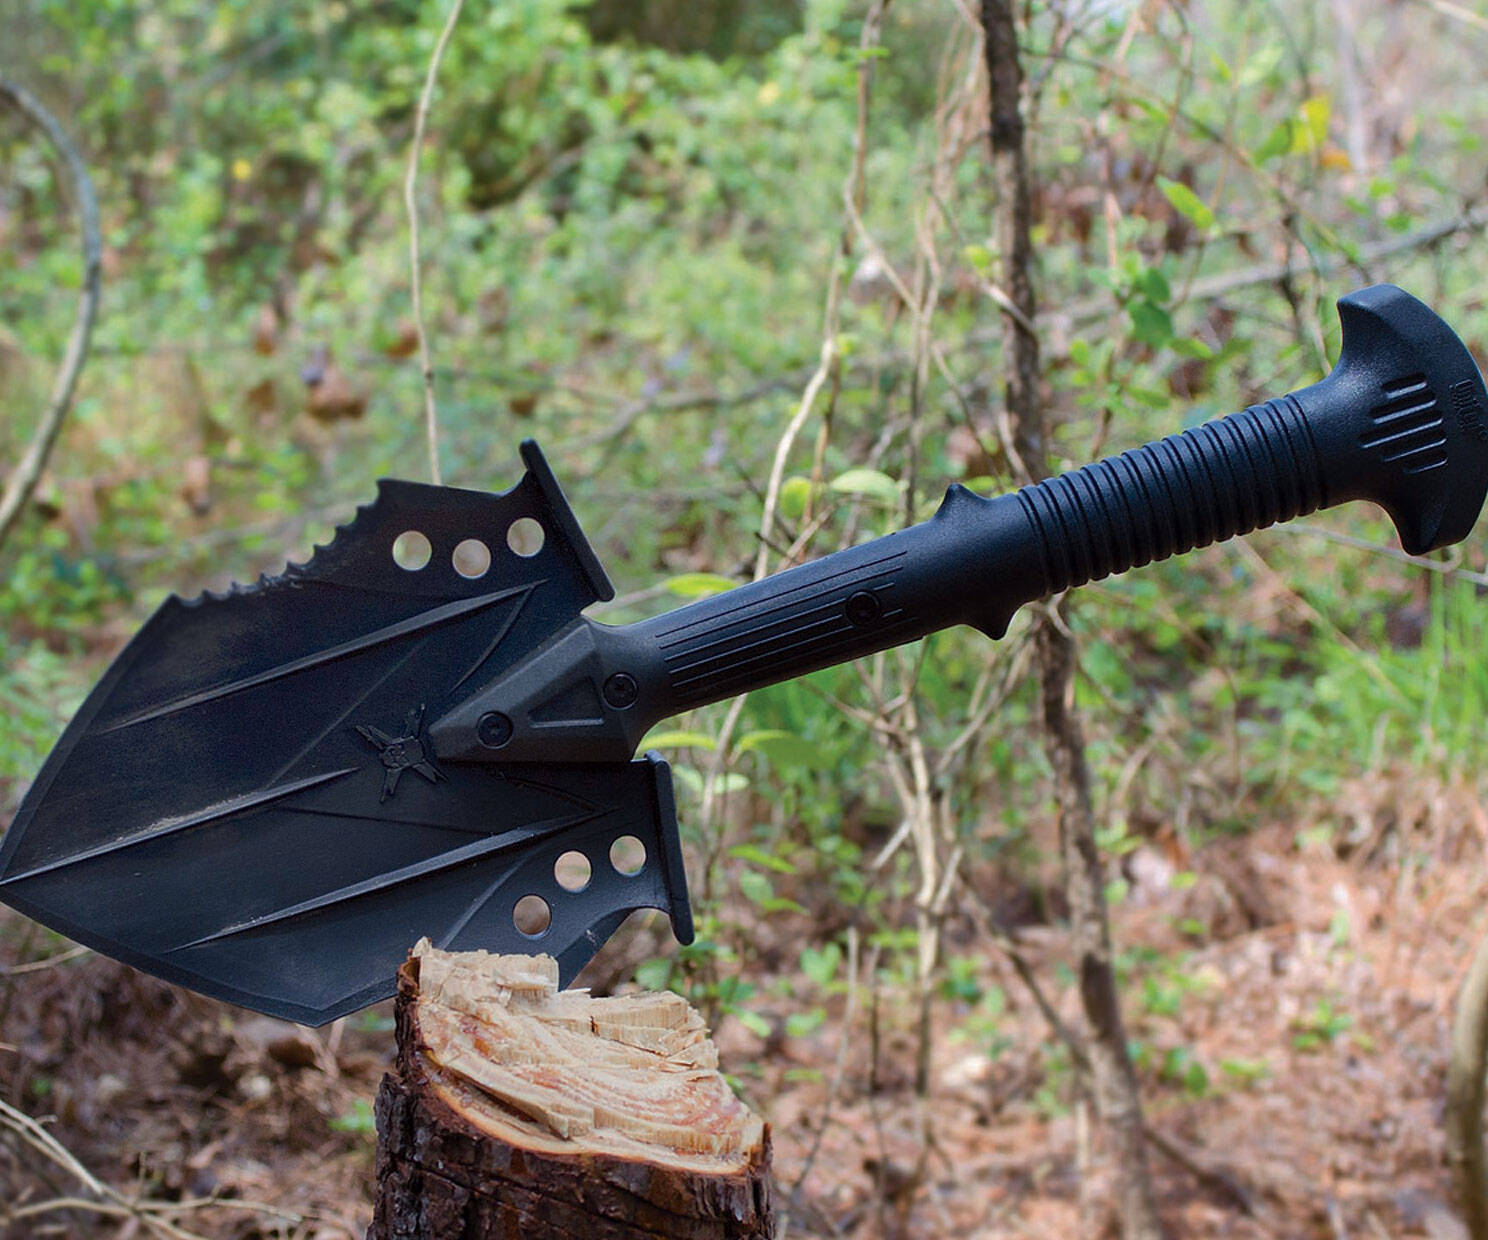 Tactical Survival Shovel - //coolthings.us